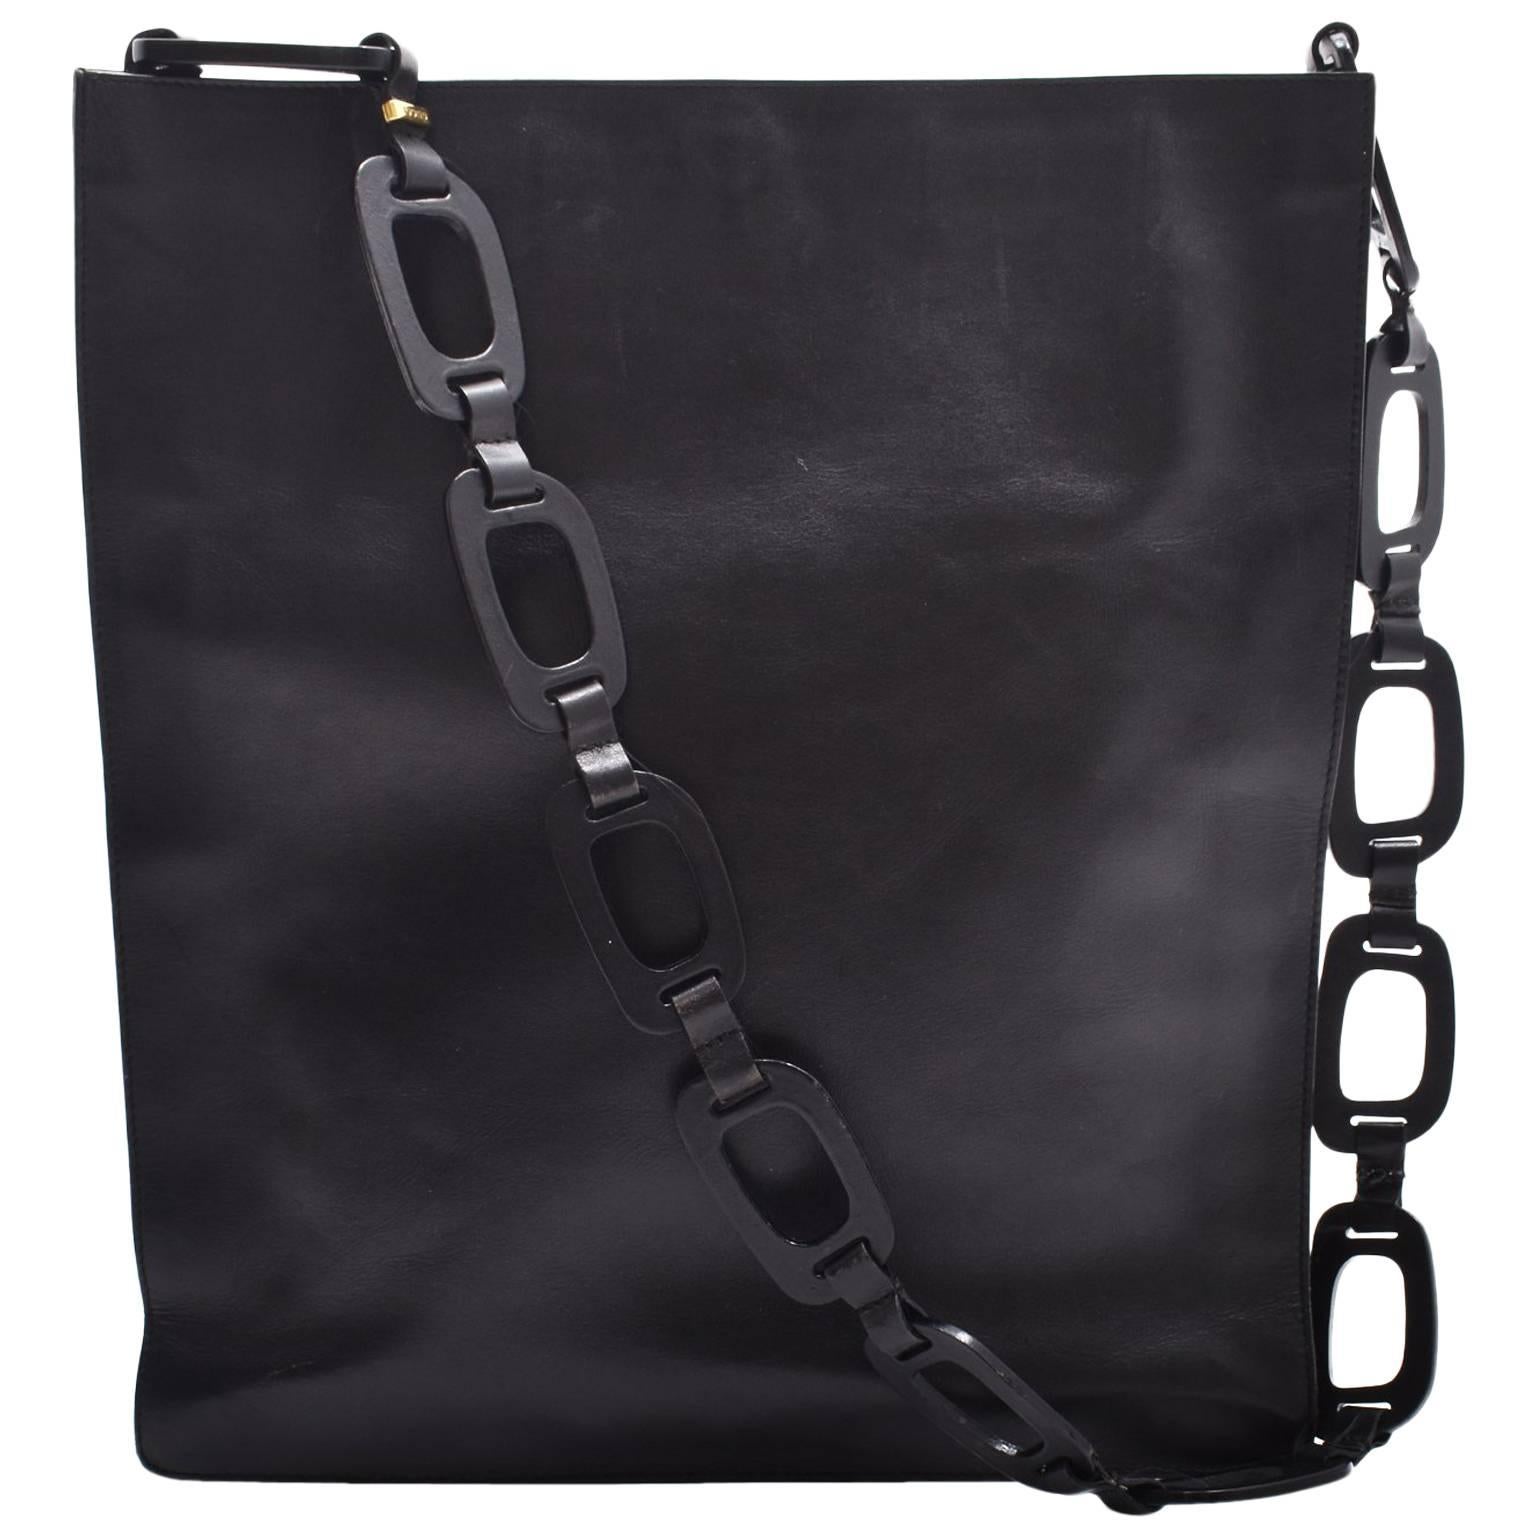 Gucci Black Leather Handbag with Geometric Chains Shoulder Strap For Sale